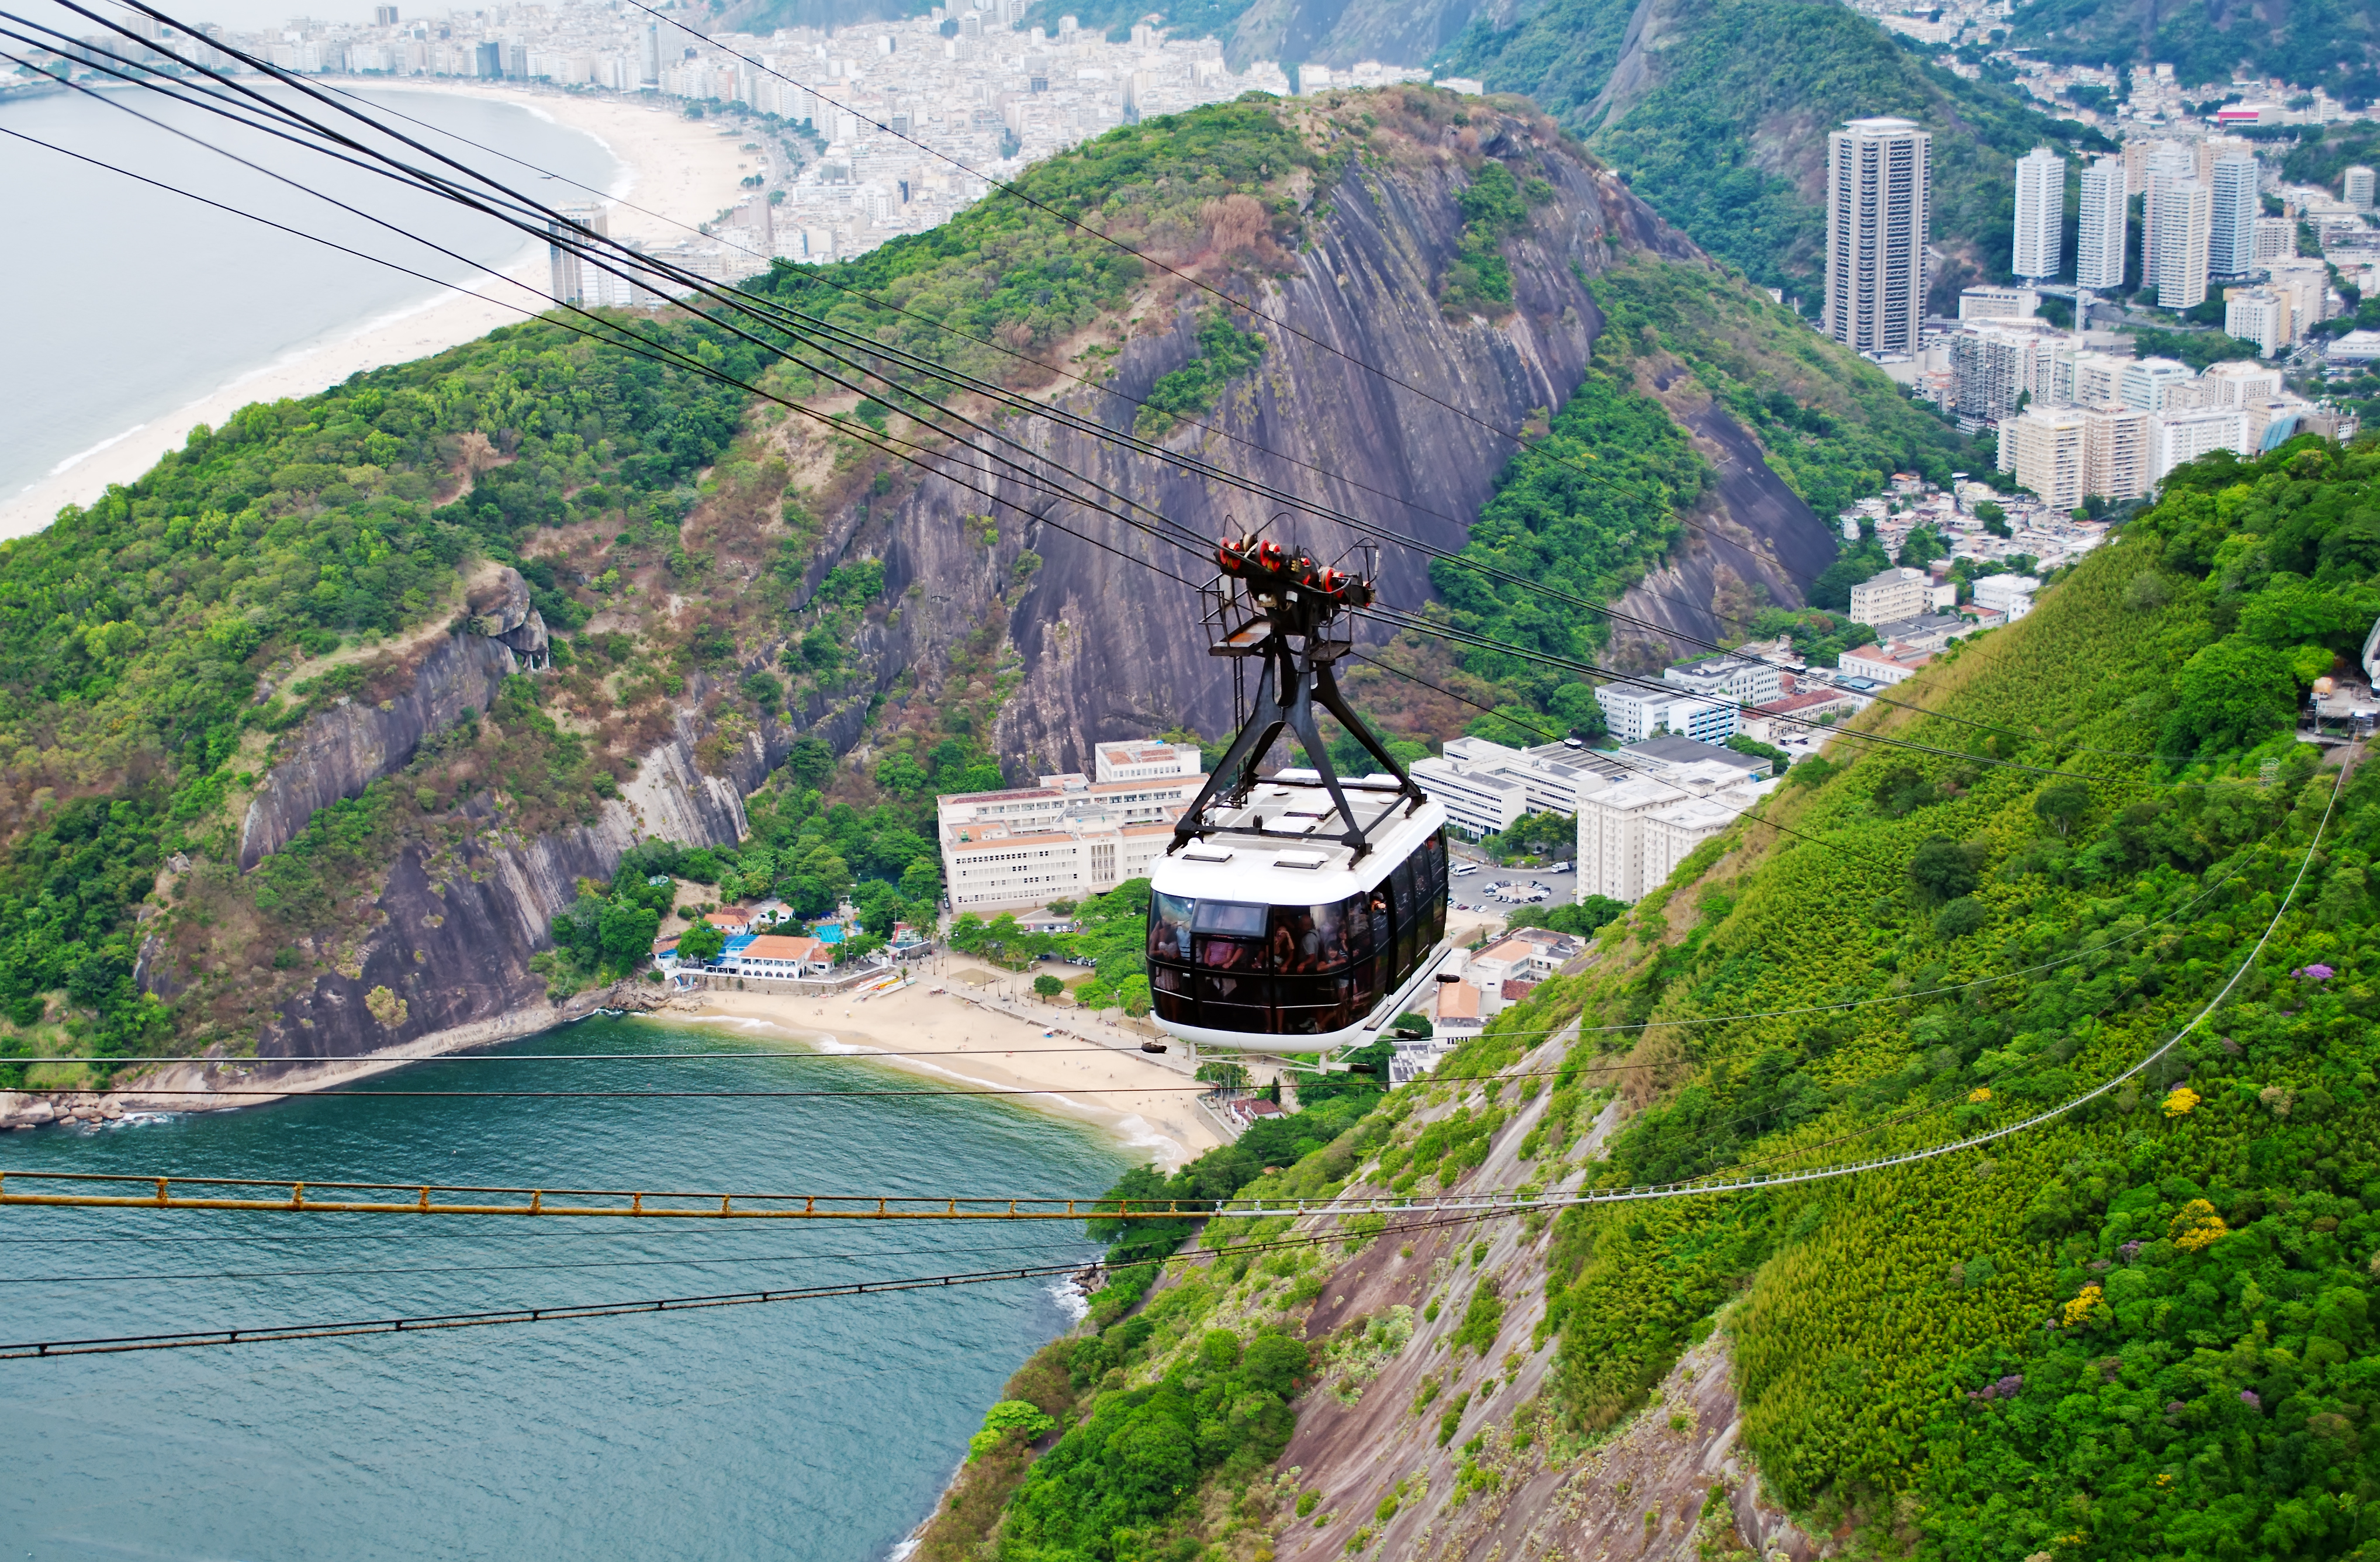 A cable car with floor to ceiling glass walls is suspended, high above the ground, from cables joining a rocky, forested hilltop to something out of frame. Behind the cable car, at sea level, is a beach in a bay between two rocky, forested hills. Numerous multi-story buildings spread inland from the beach.